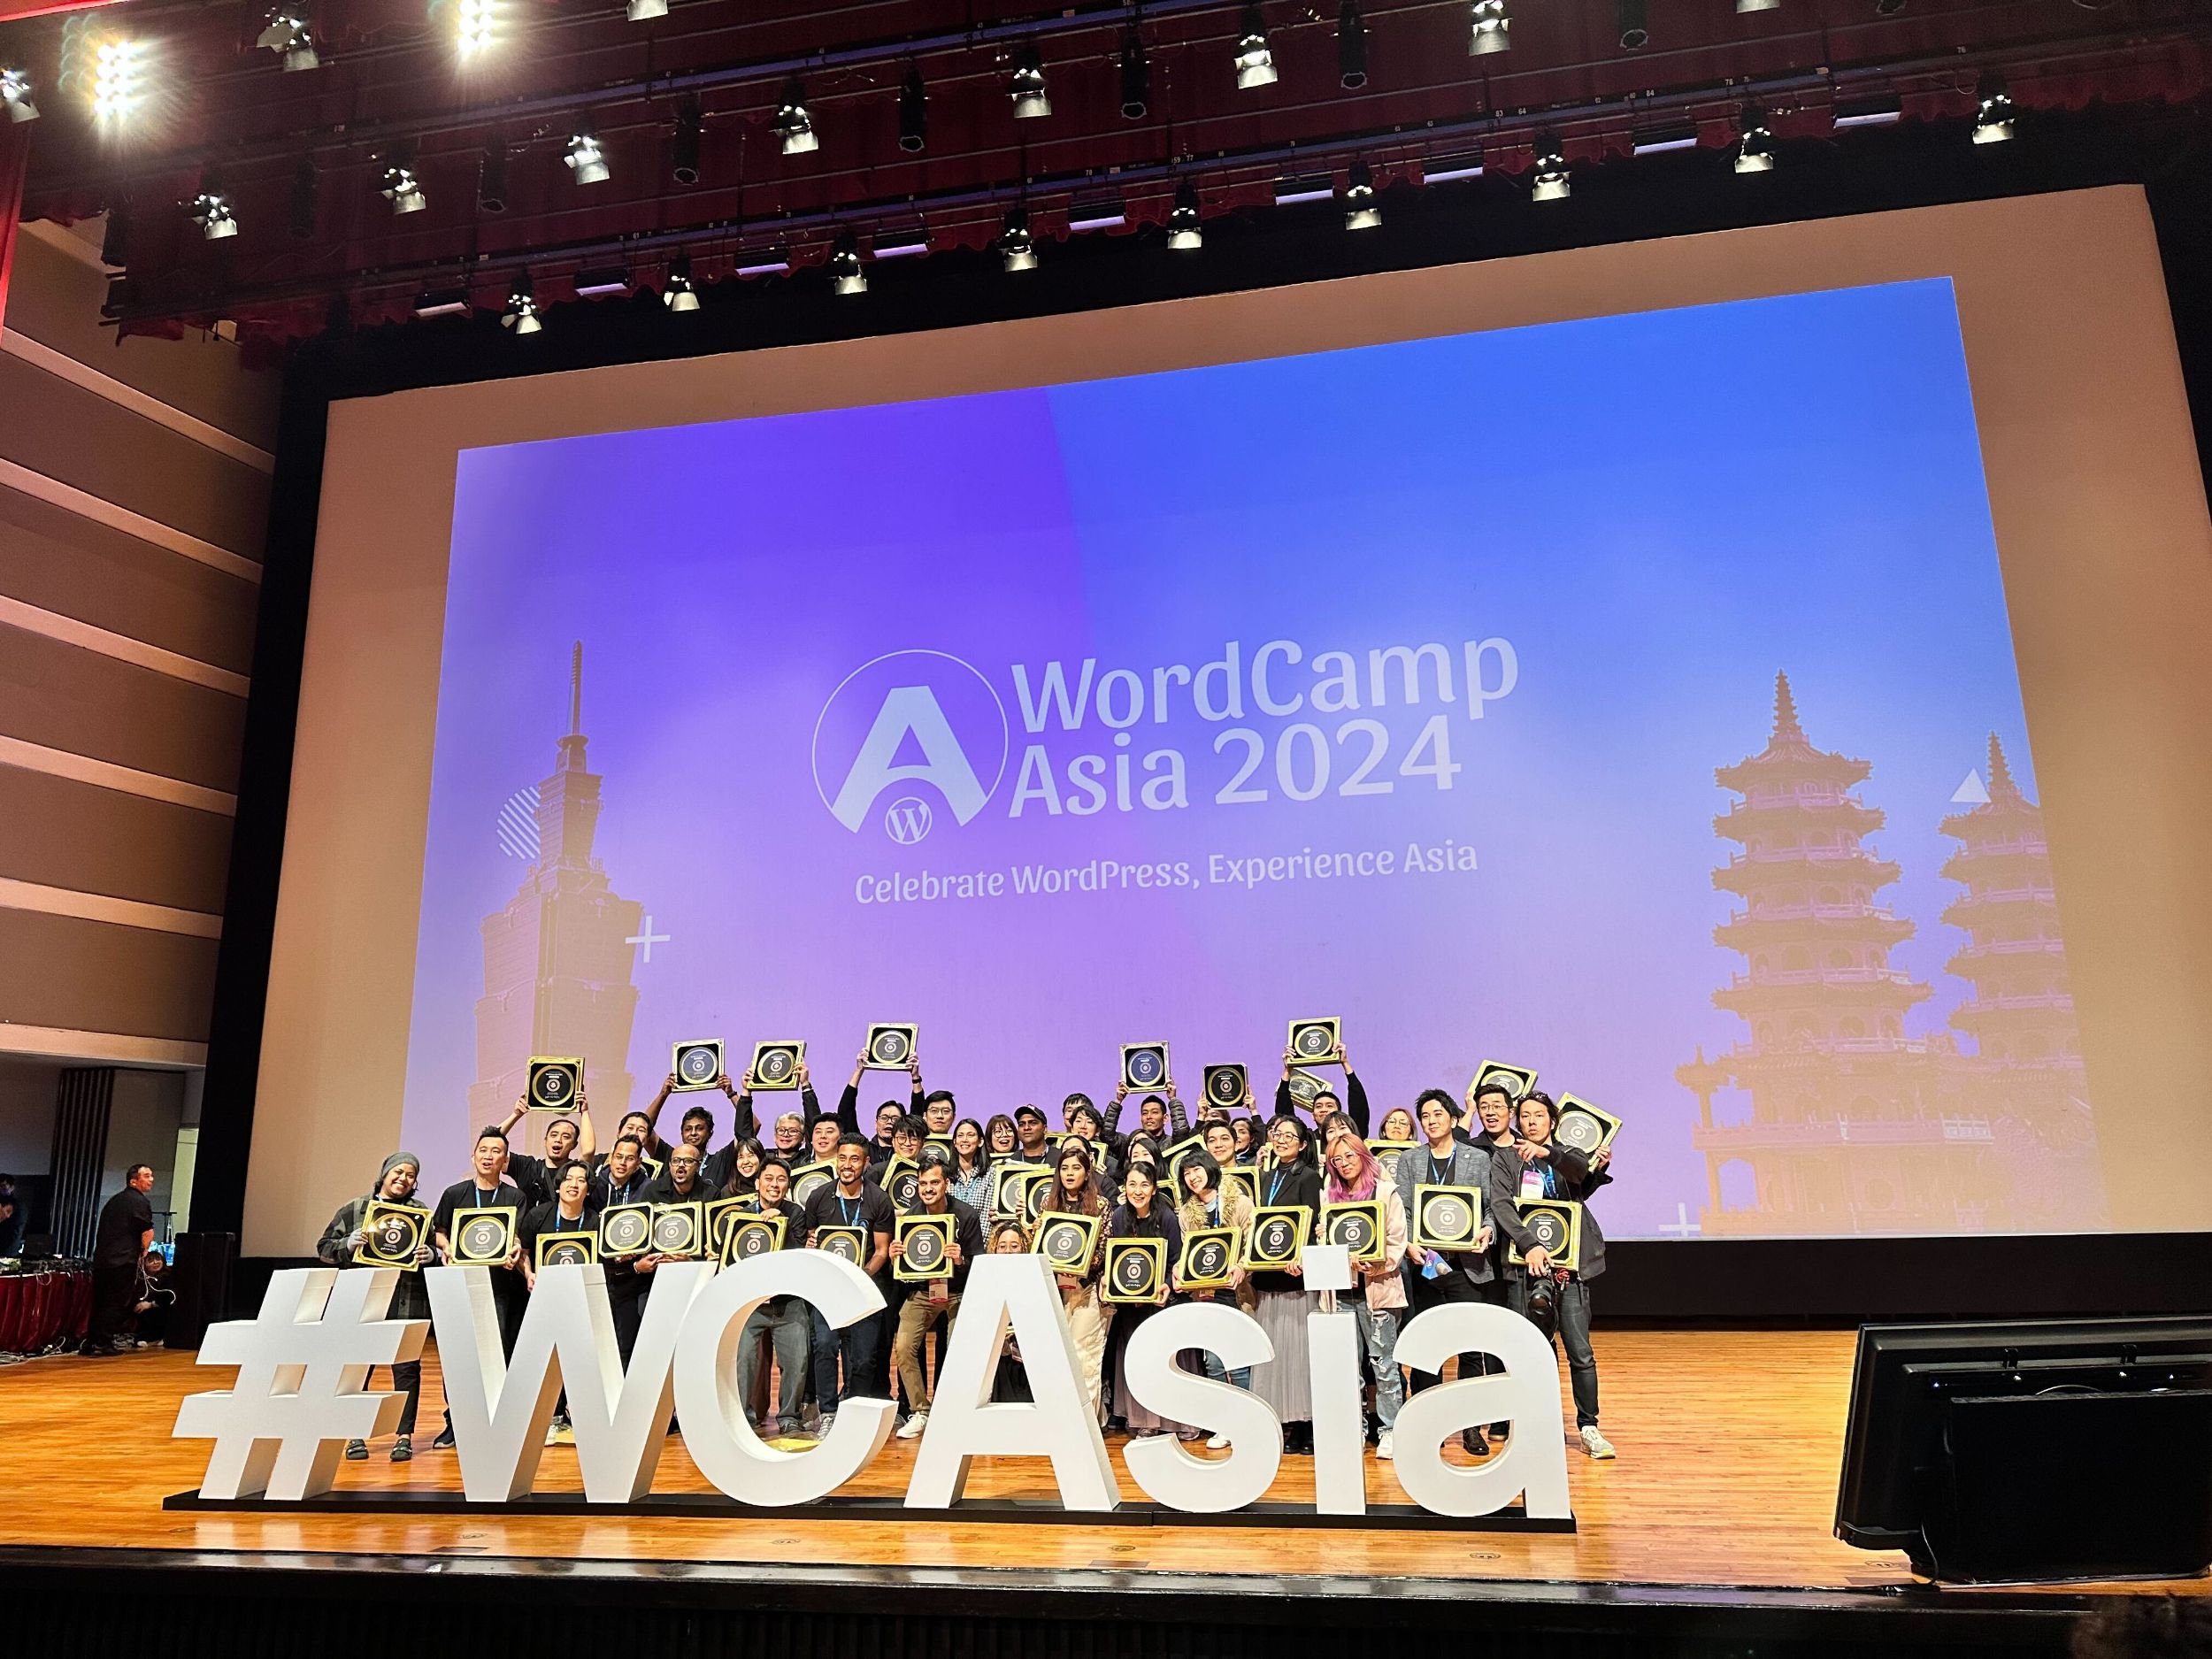 Day 3 on Mar 8 for WordCamp Asia 2024 - Final, Closing Remarks